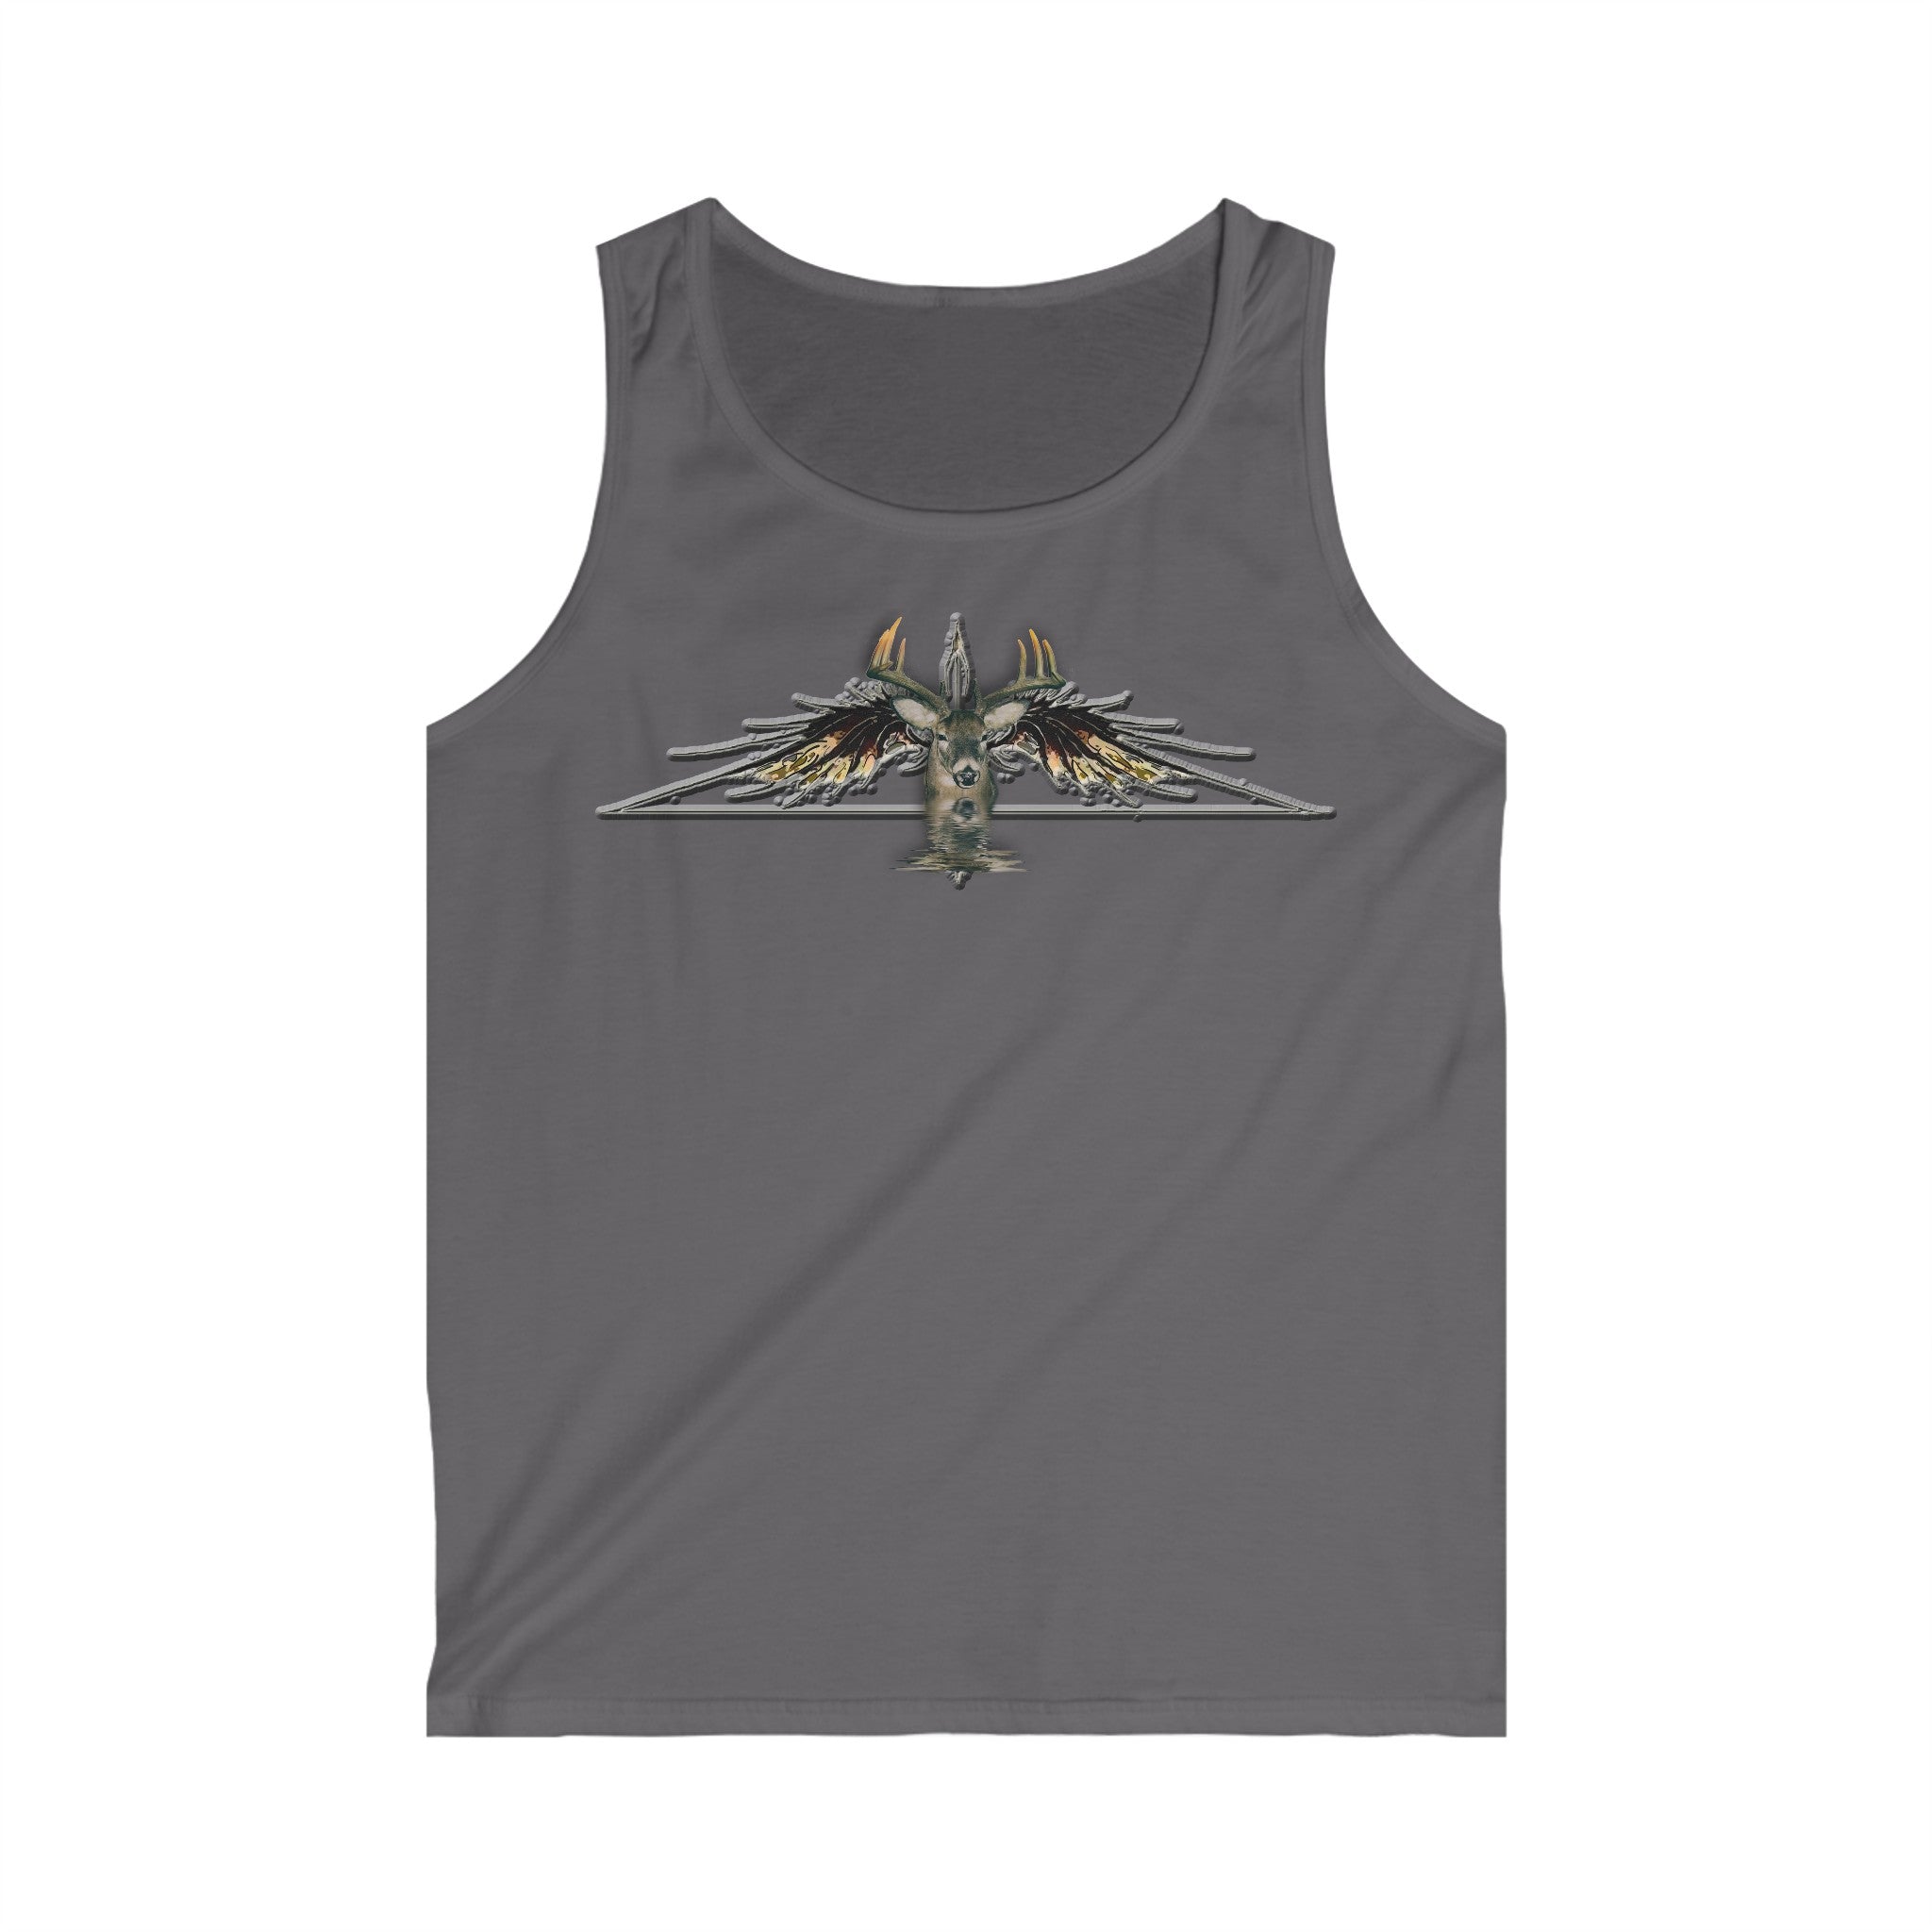 Bowhunter Men's Softstyle Tank Top